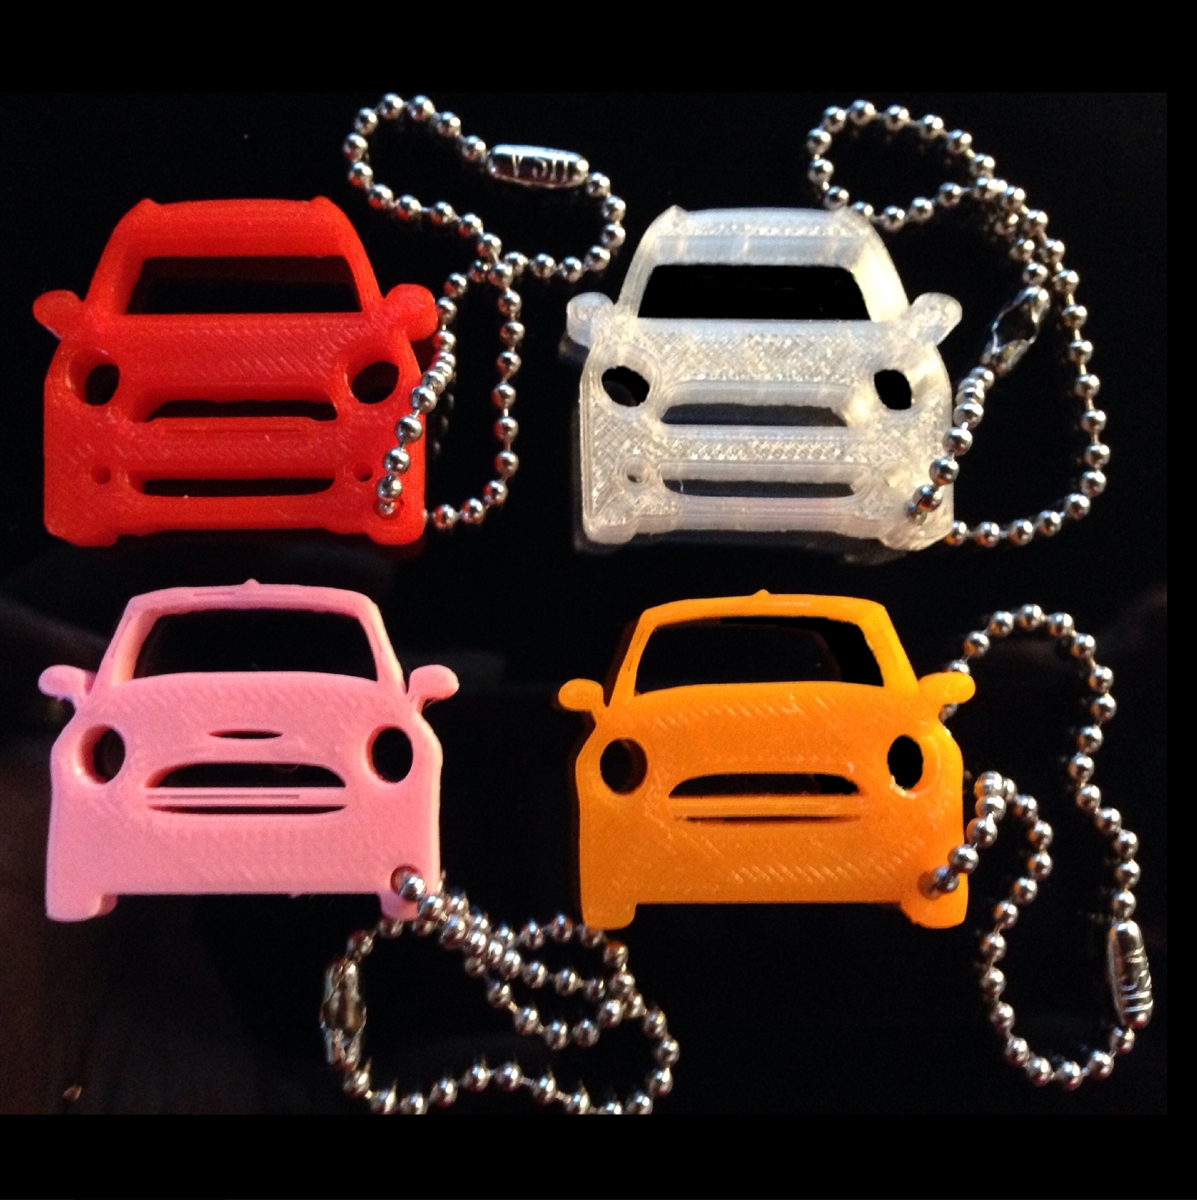 3D Printed car keychains by 3d_print